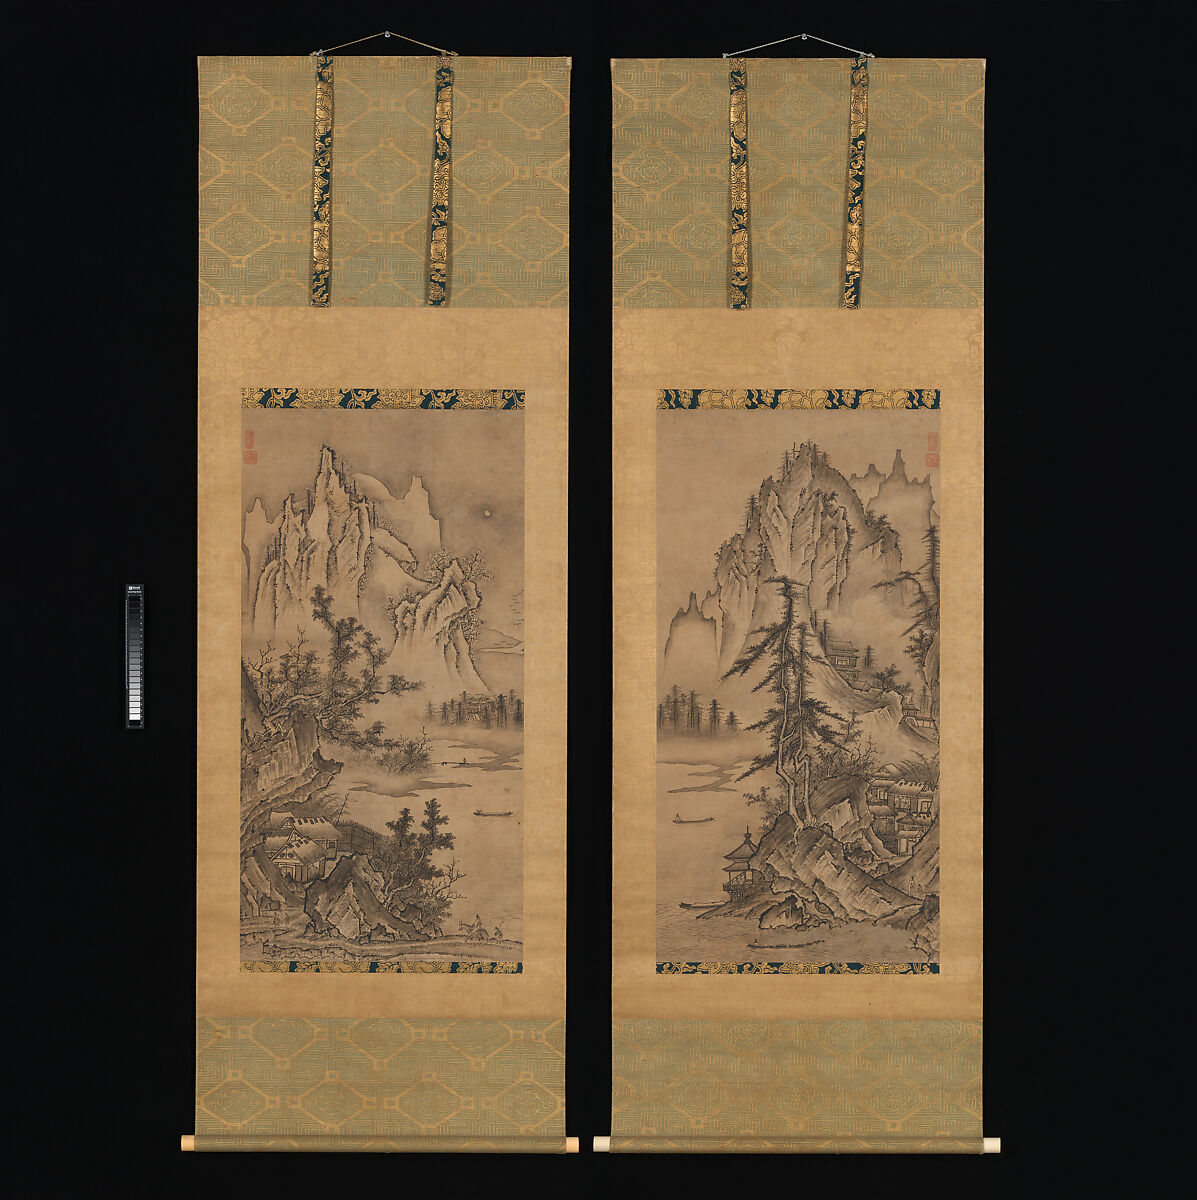 Landscapes of the Four Seasons, Keison  Japanese, Pair of hanging scrolls; ink on paper, Japan